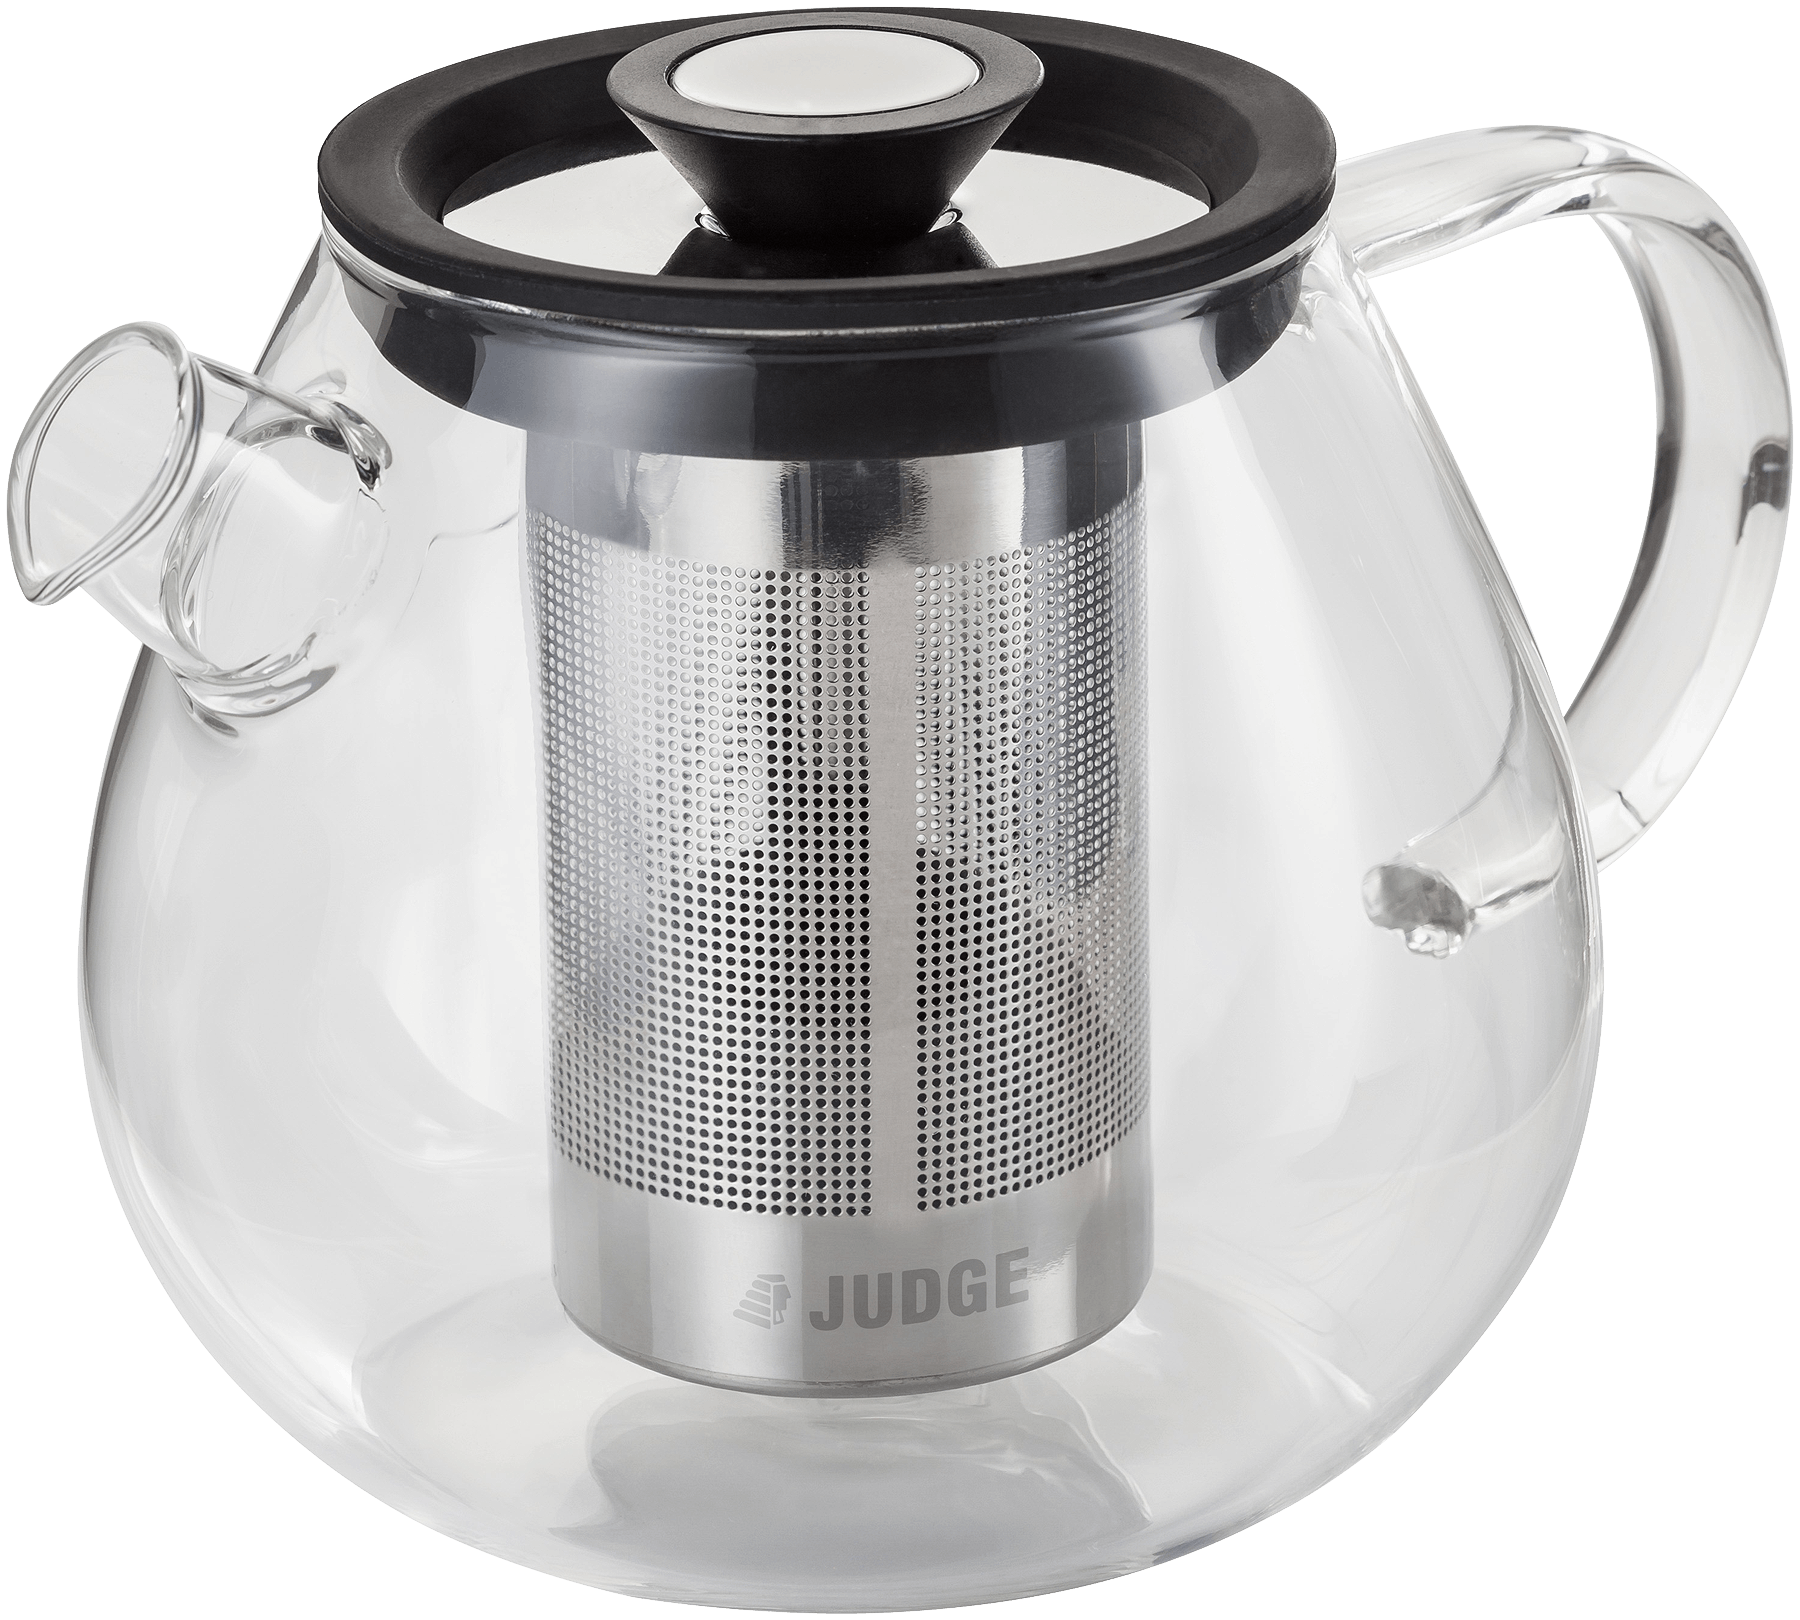 Judge Brew Control 5 Cup Glass Teapot with Stainless Steel Infuser